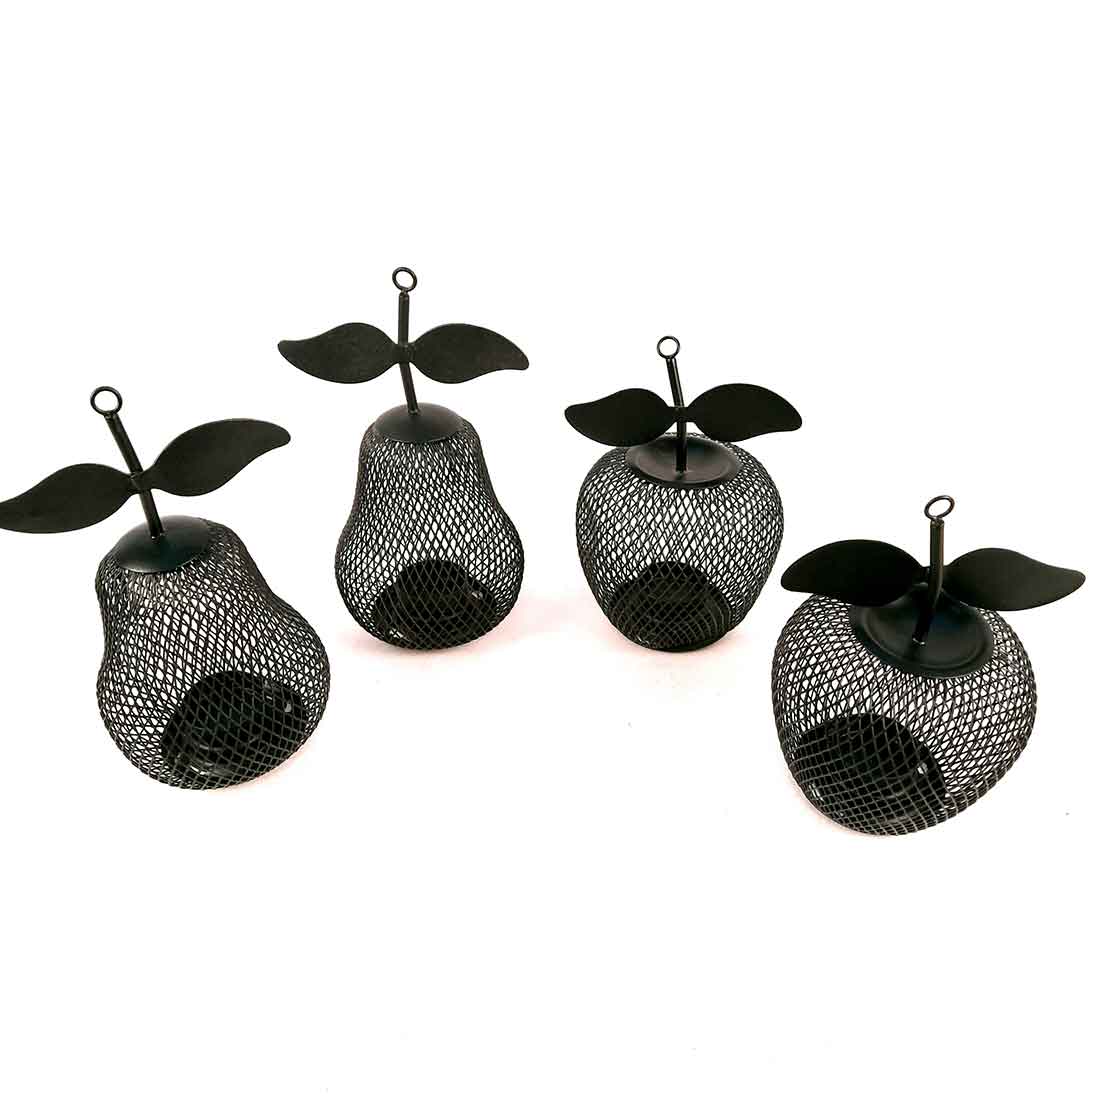 Candle Holder Stands -  | Tea Light Holders With One Slots | Tea Light Candle Stand - Apple & Pear Design - For Home, Table, Living Room, Dining room, Bedroom Decor | For Diwali Decoration & Gifts - Set of 4